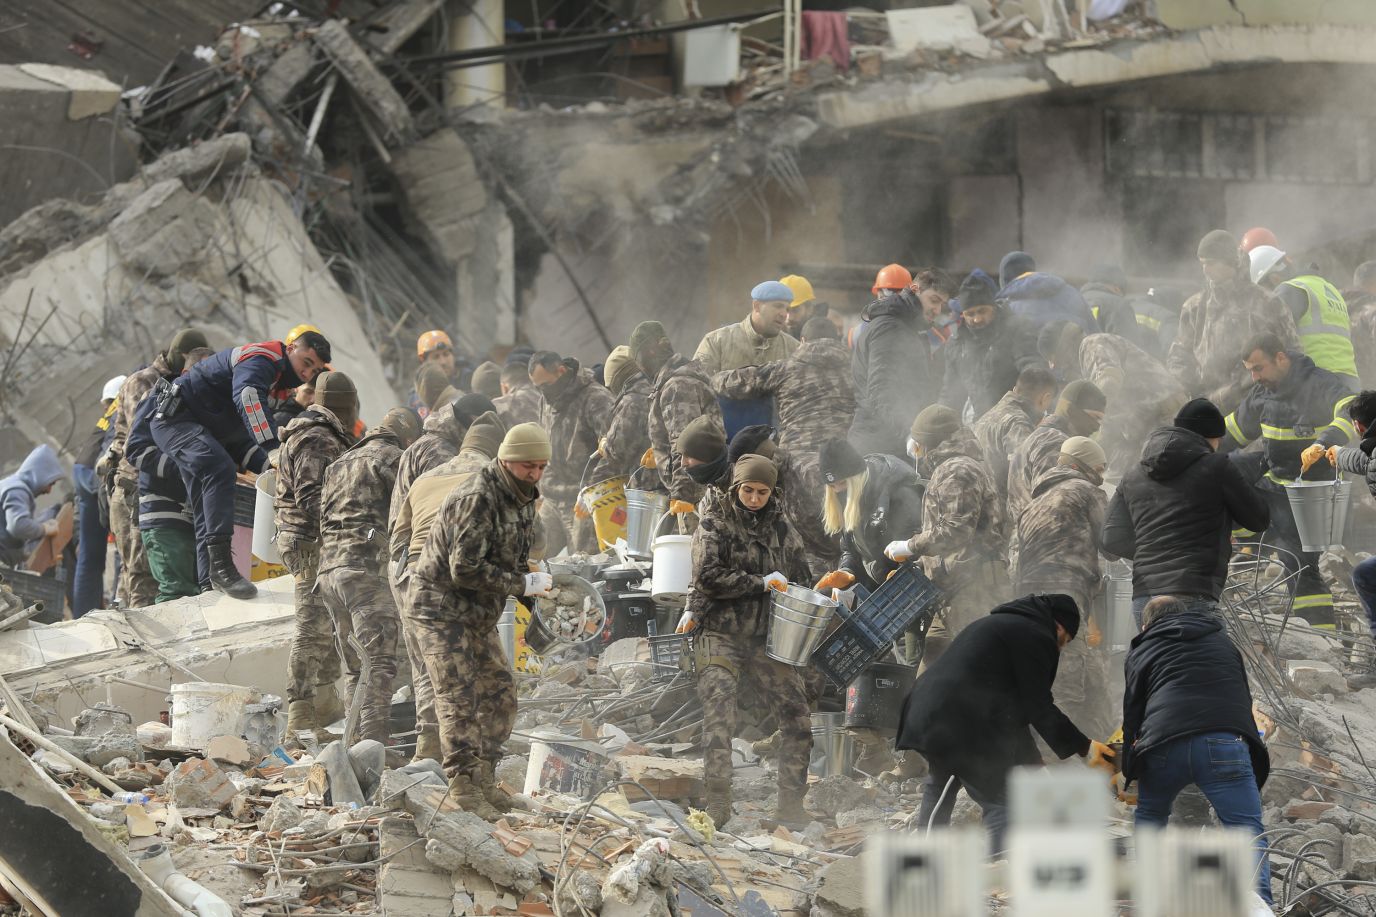 Search-and-rescue efforts continue at the site of a destroyed building in Diyarbakir.